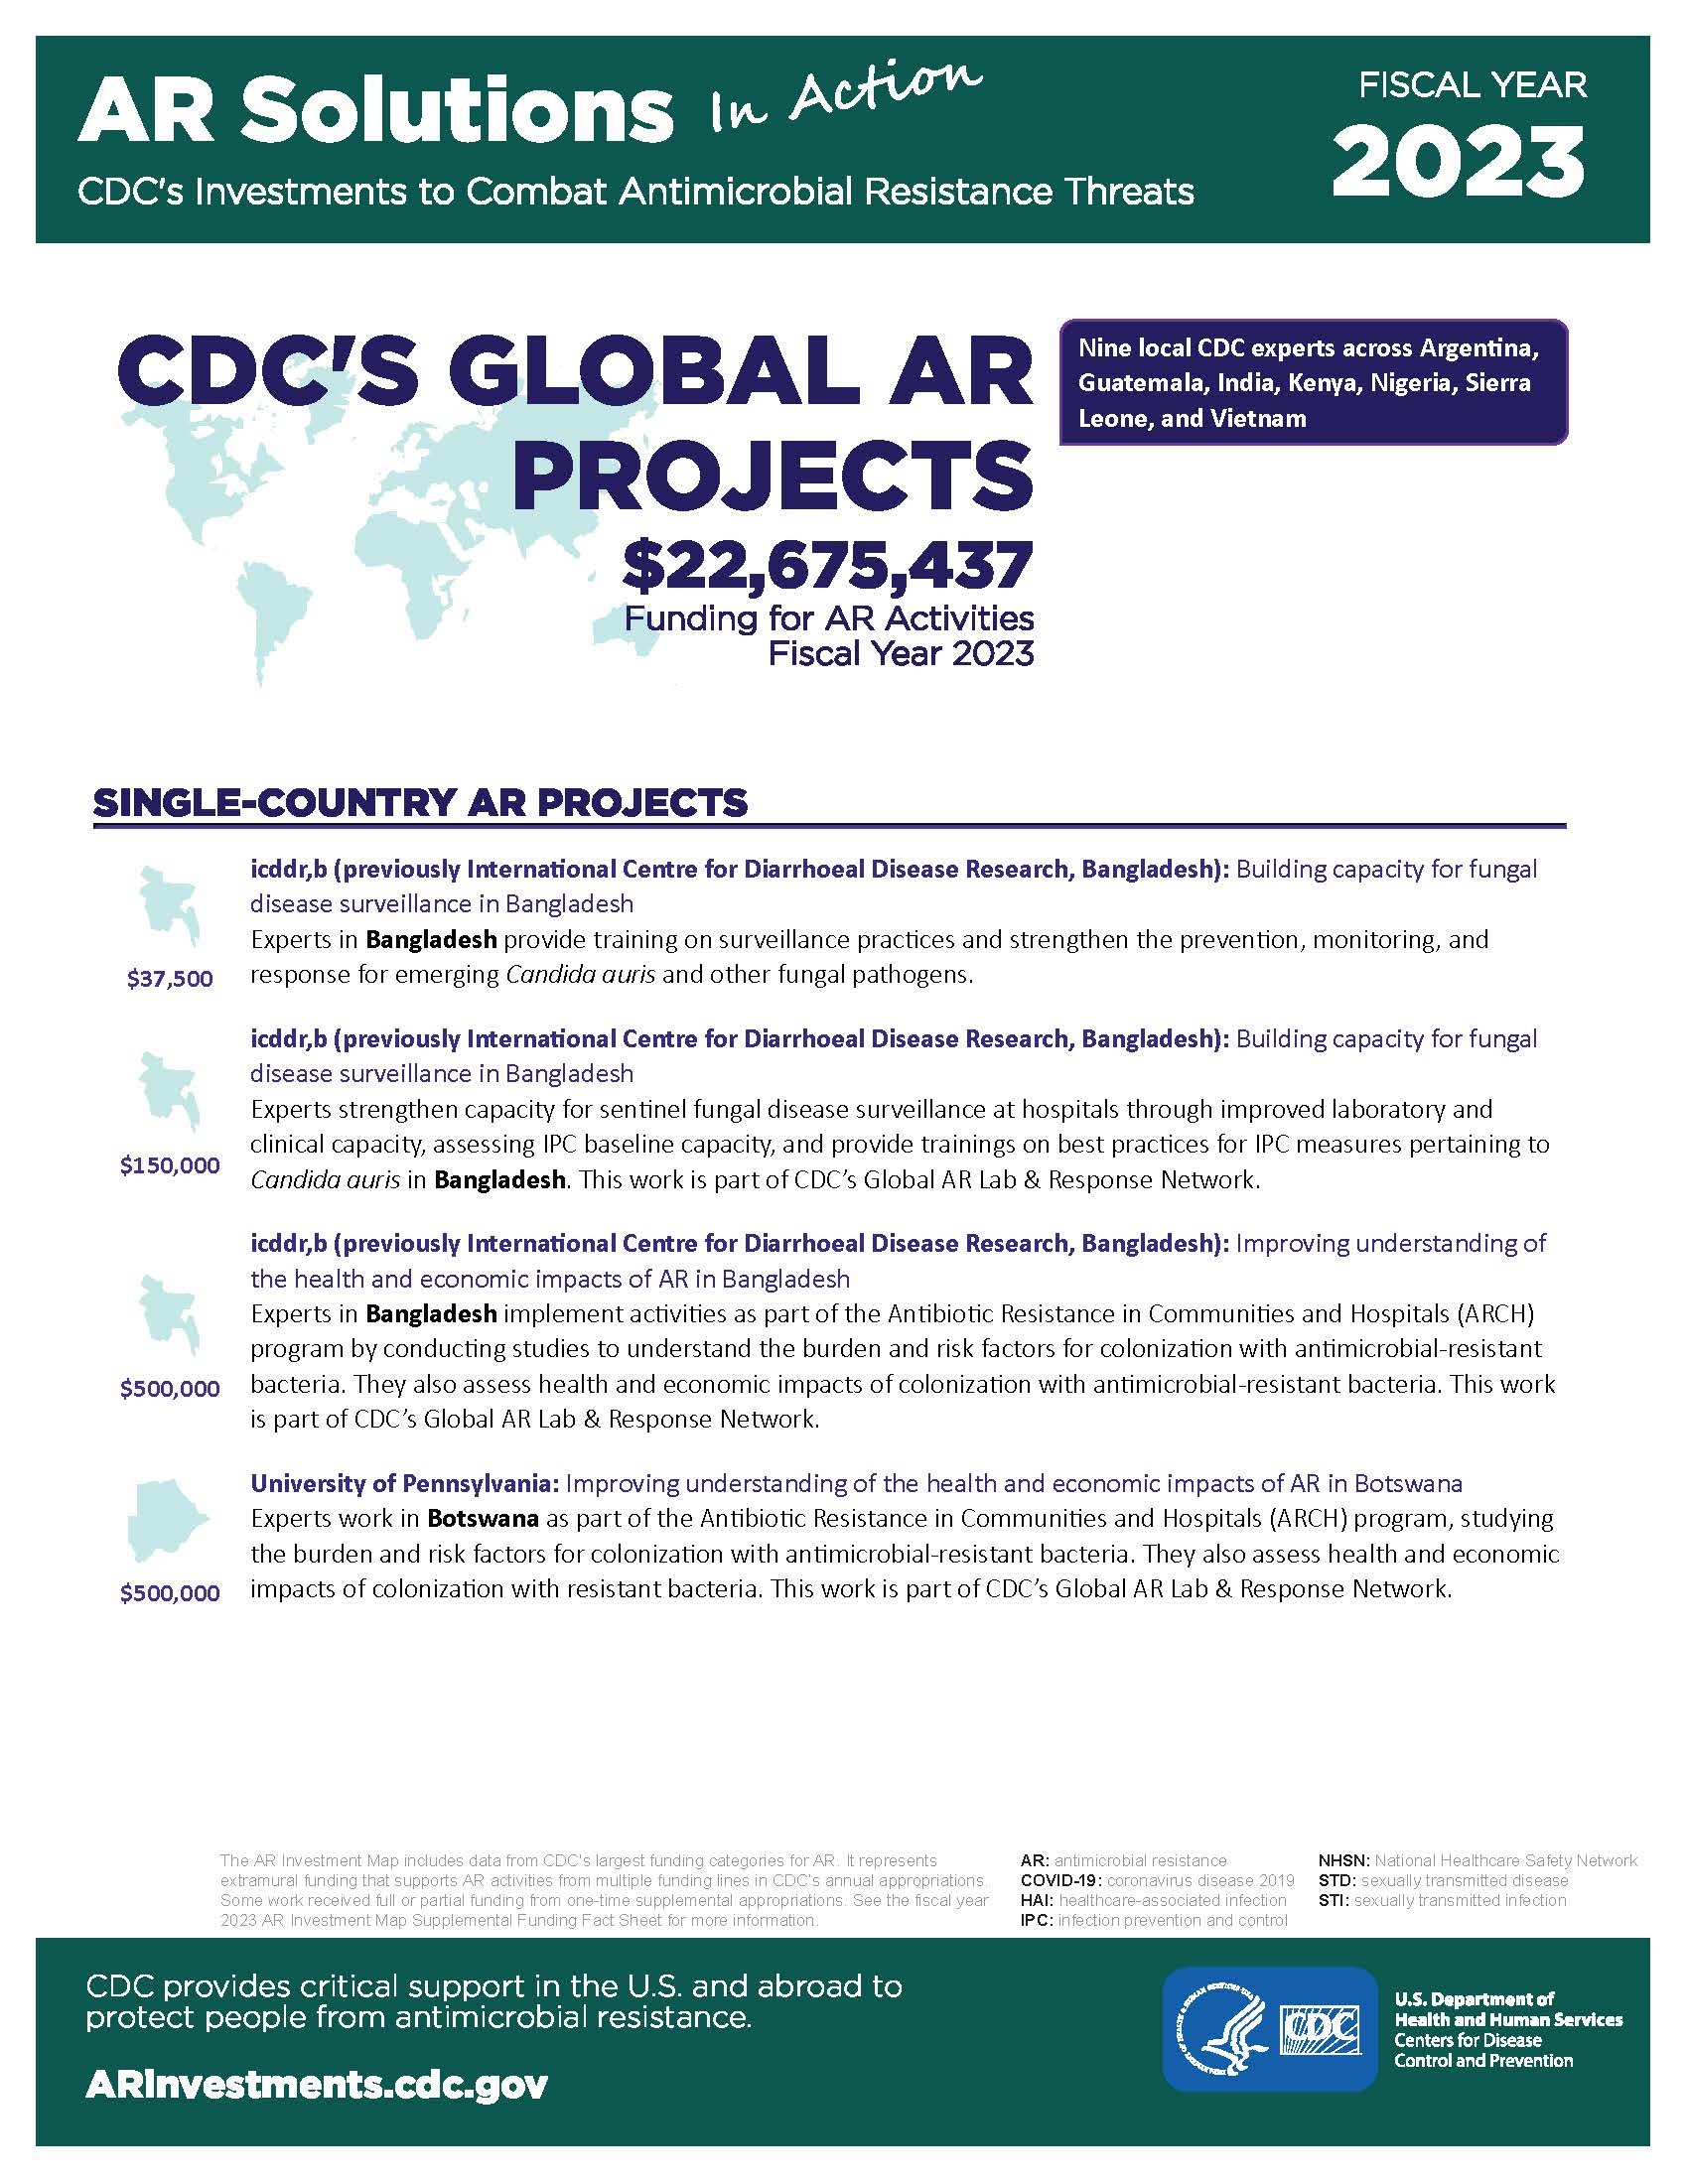 View Factsheet for Global projects